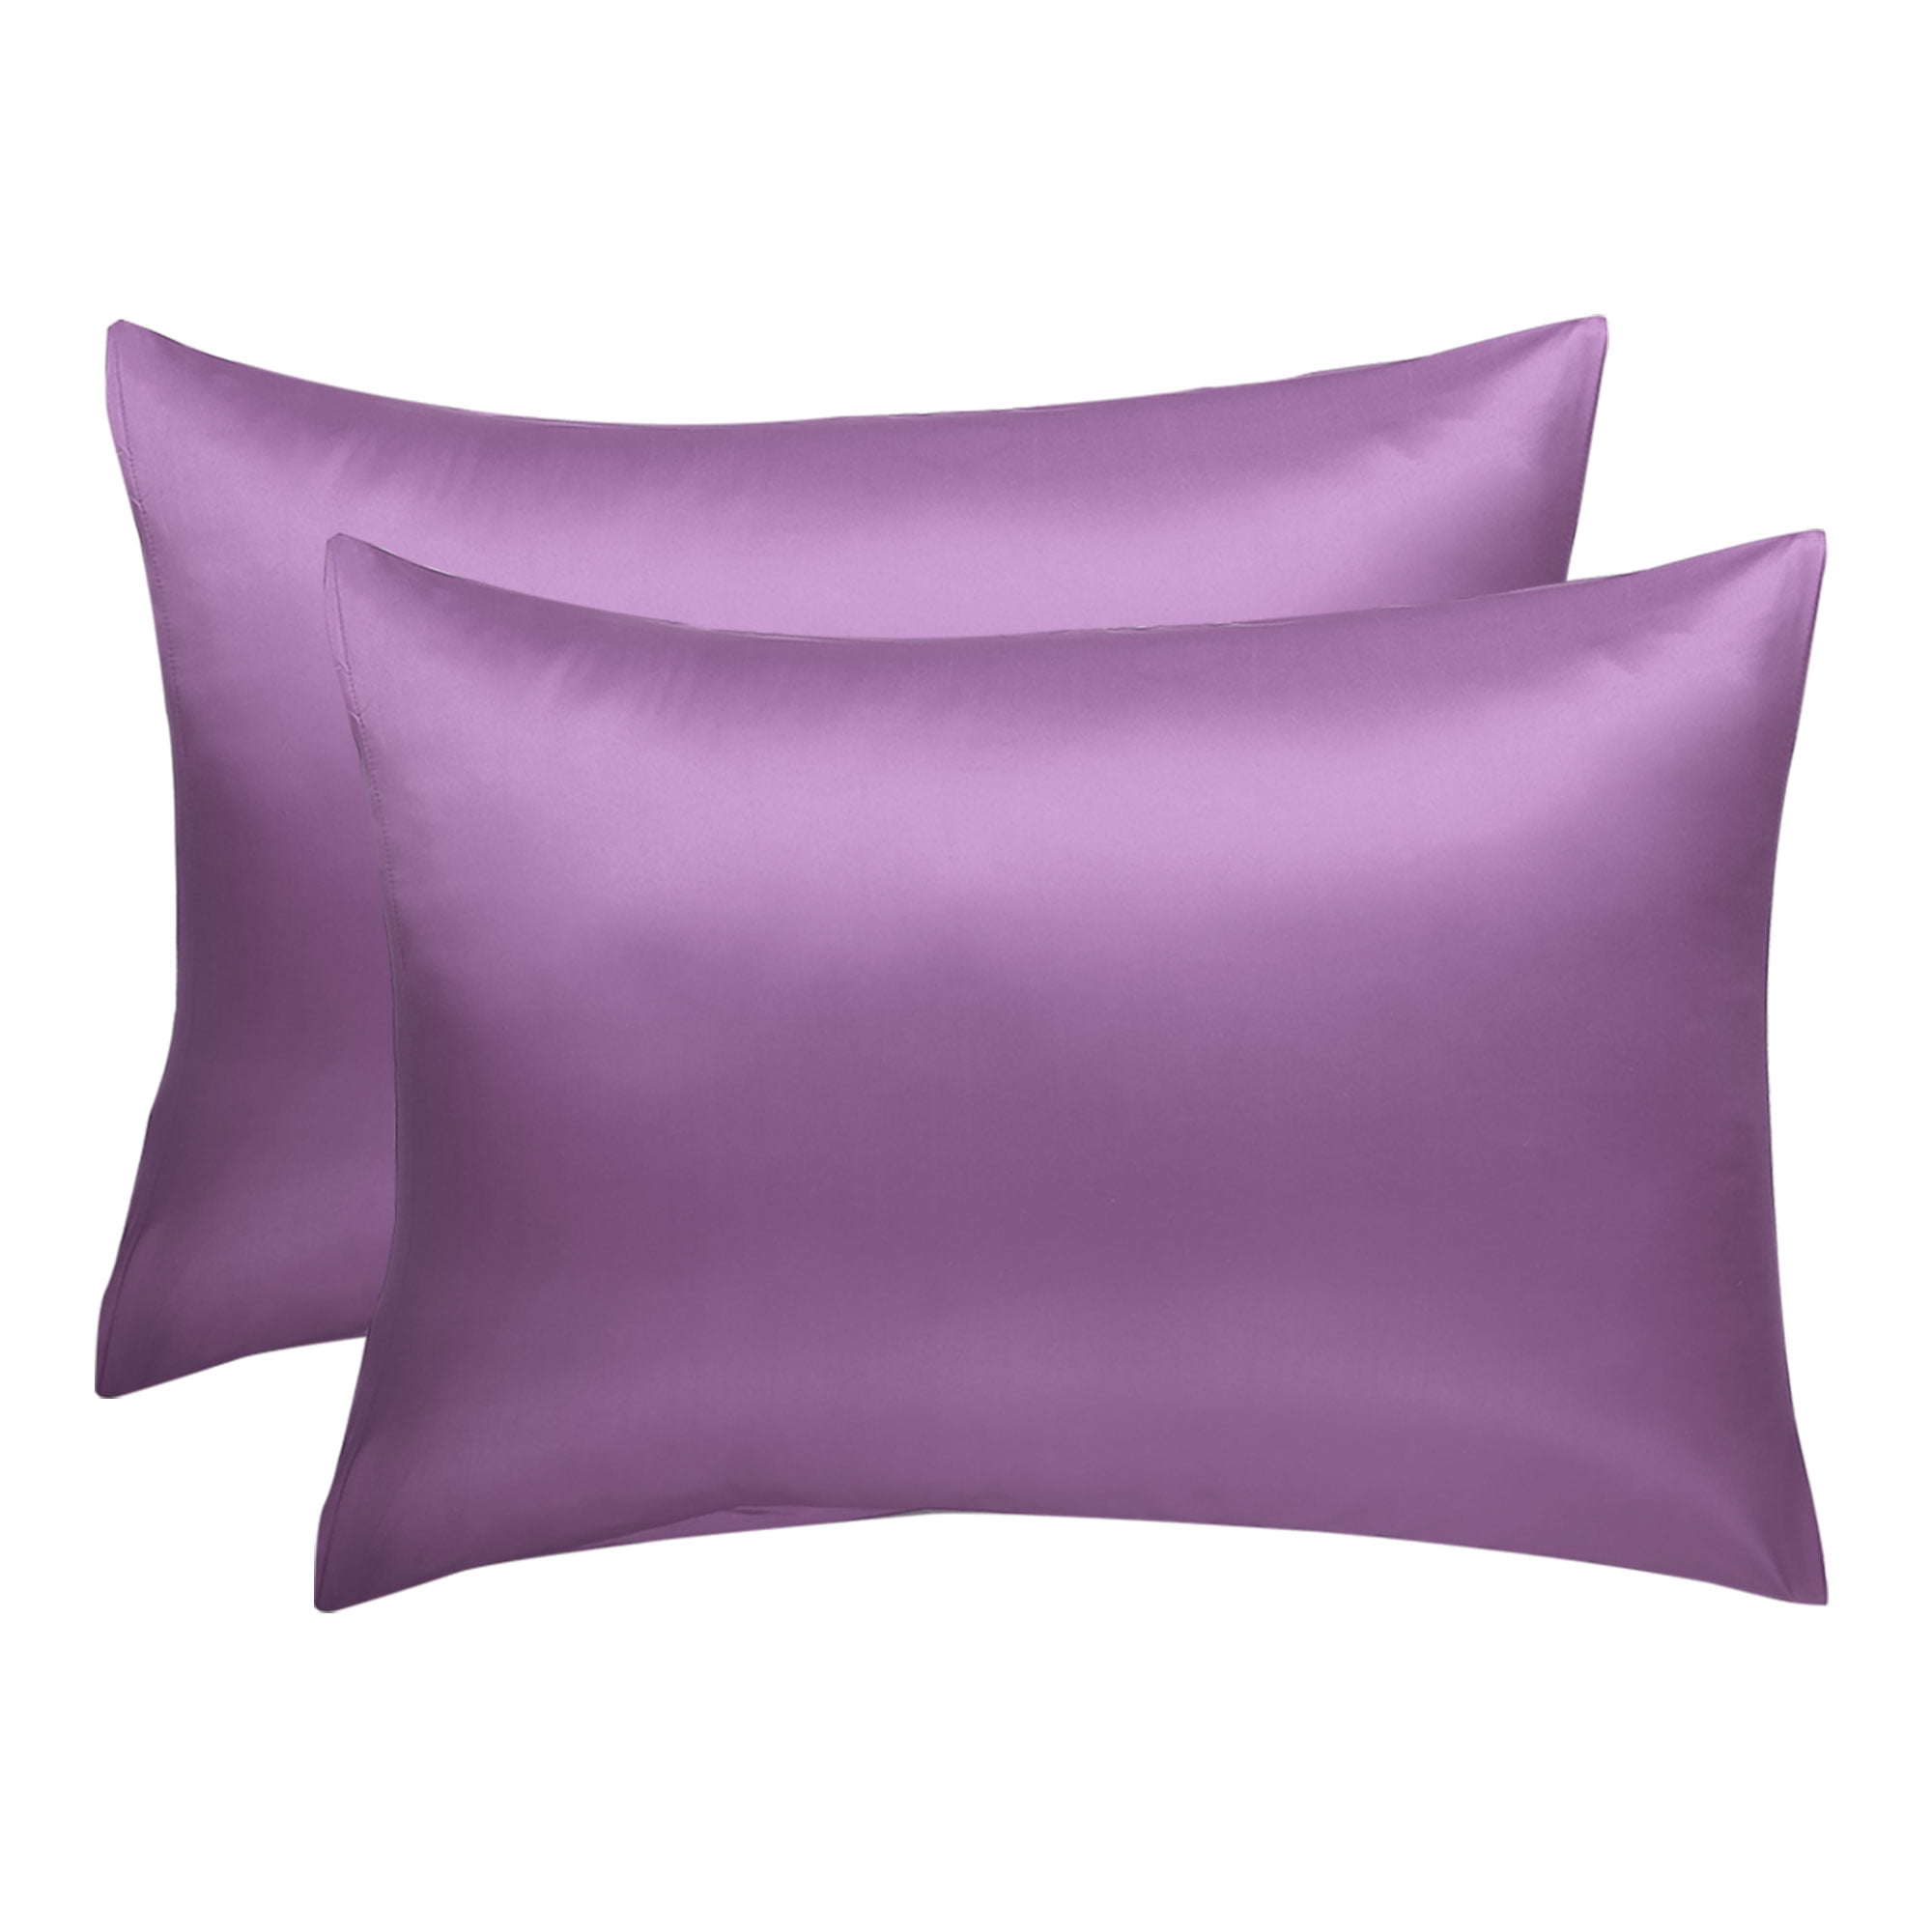 Details about   Satin Silk Body Pillowcase Pillow Case Cover Luxury Smooth Cooling Size 20"x54 